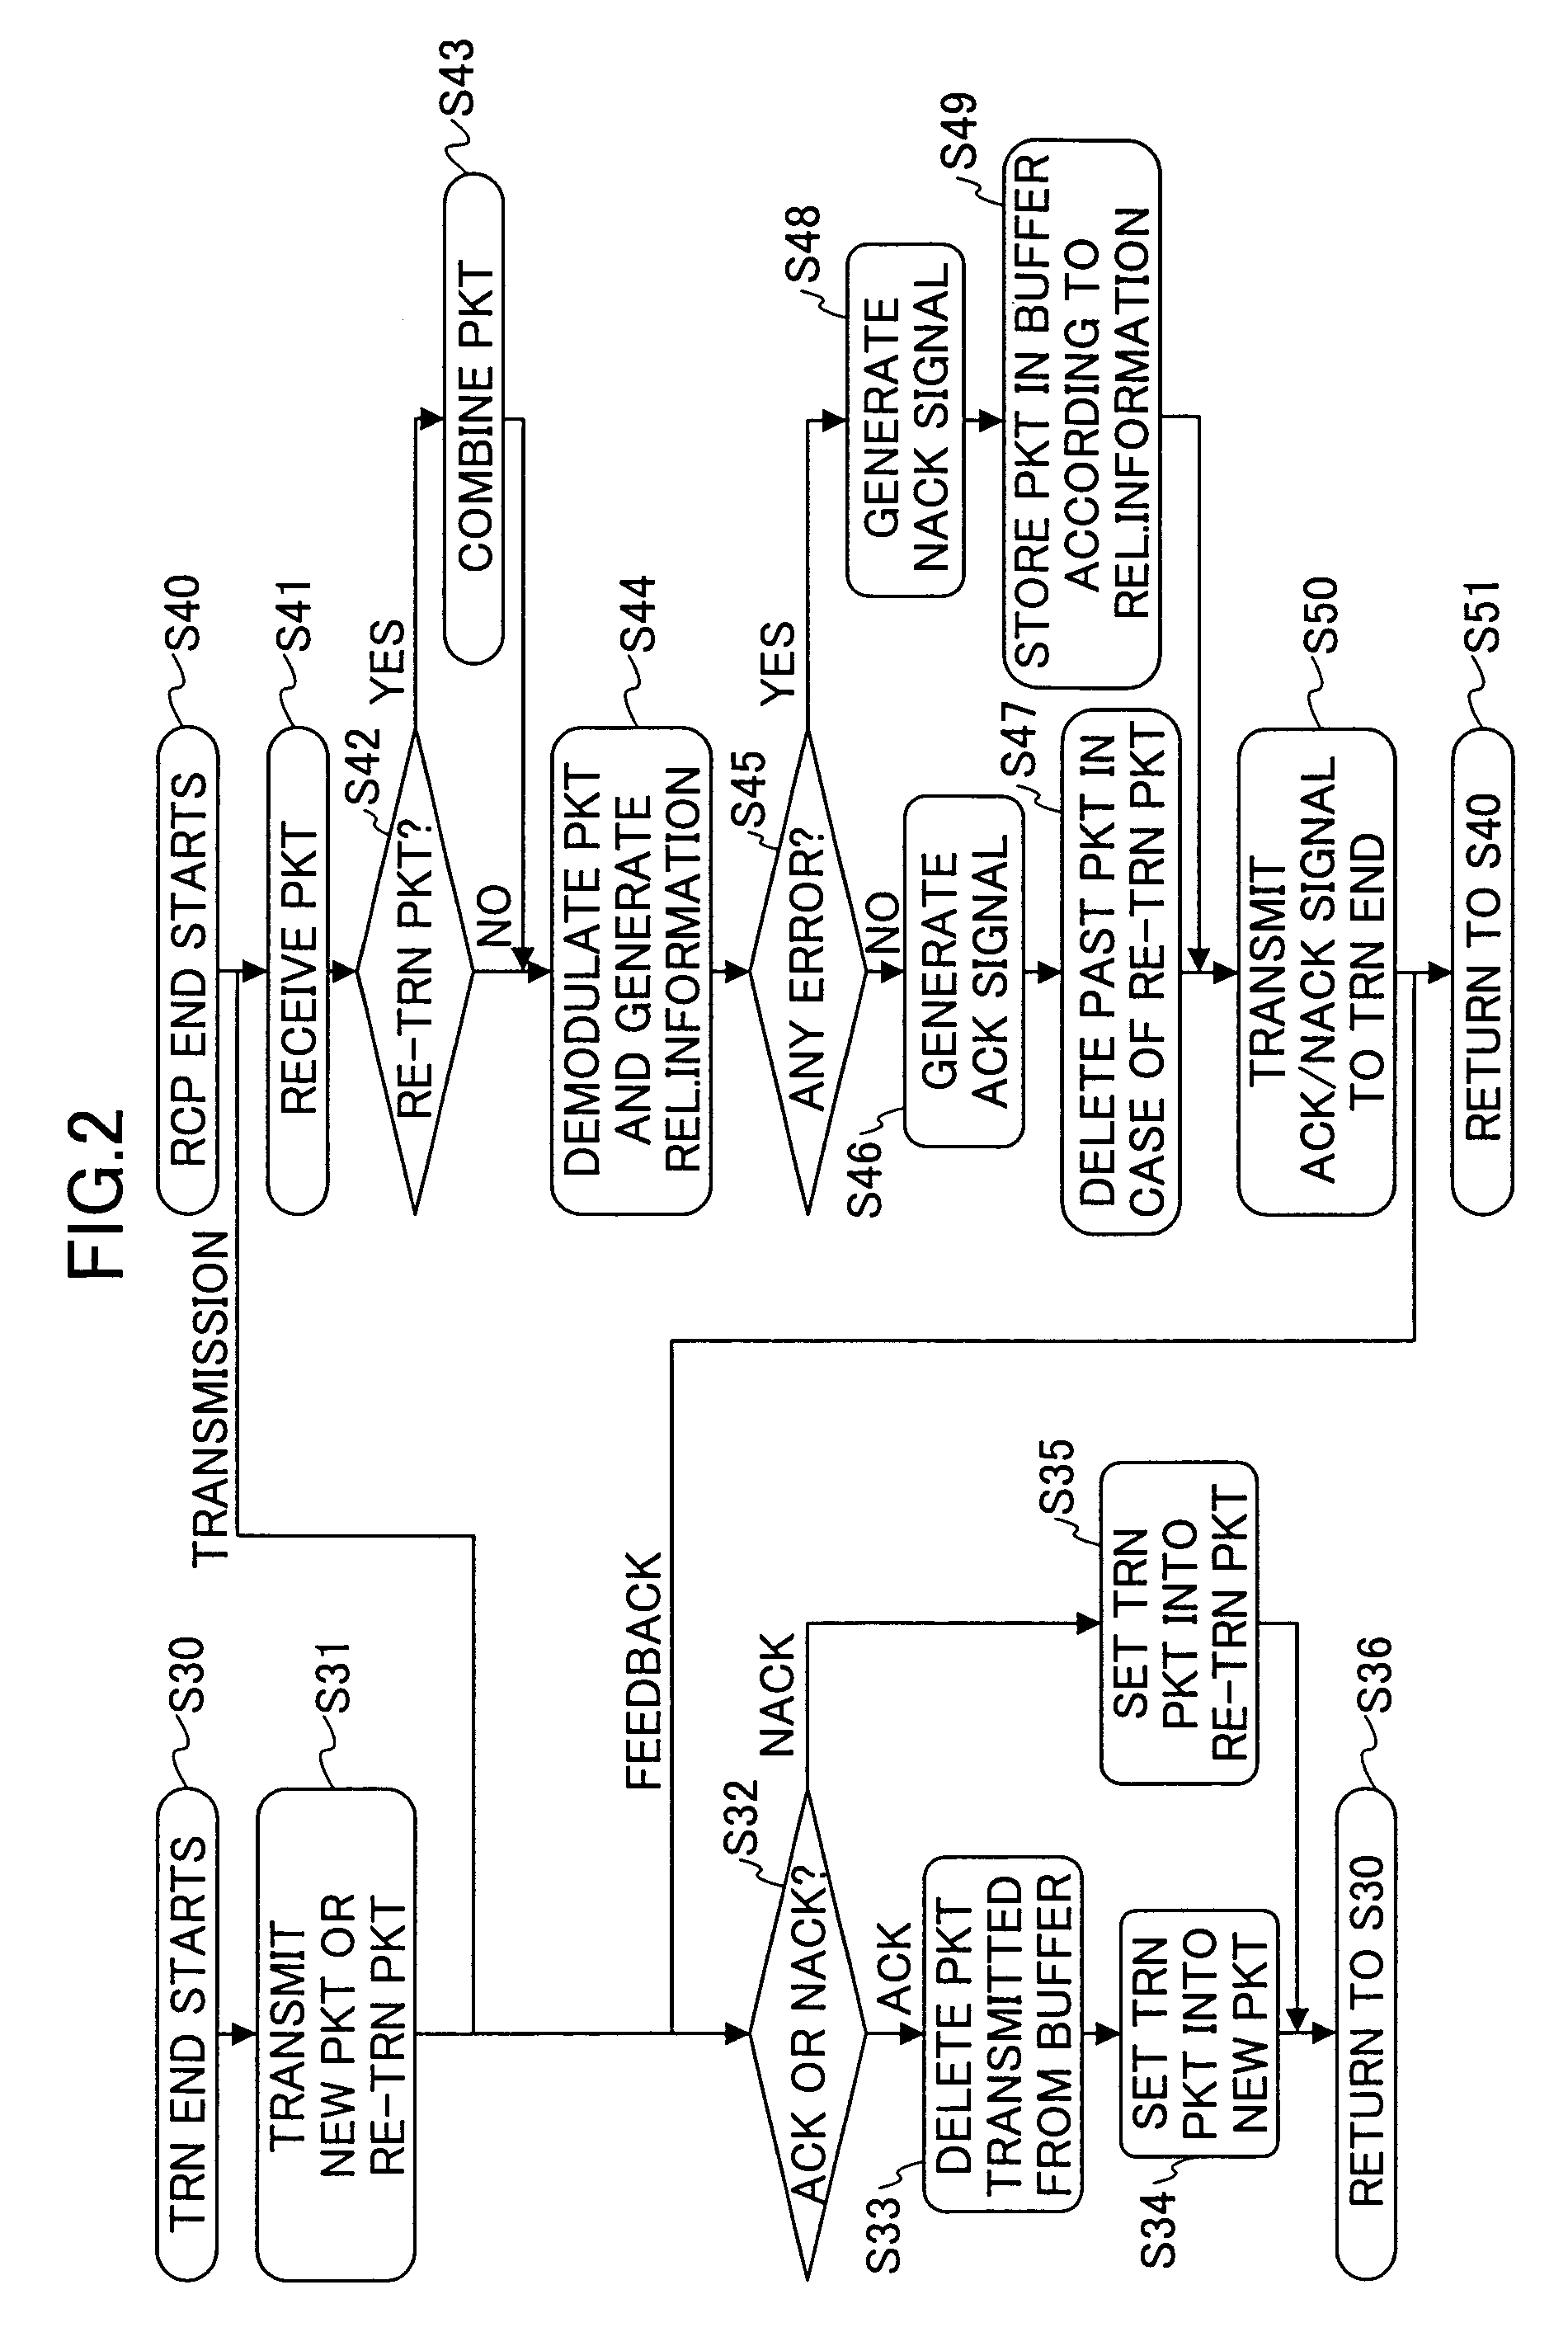 Communication system and method employing automatic repeat request